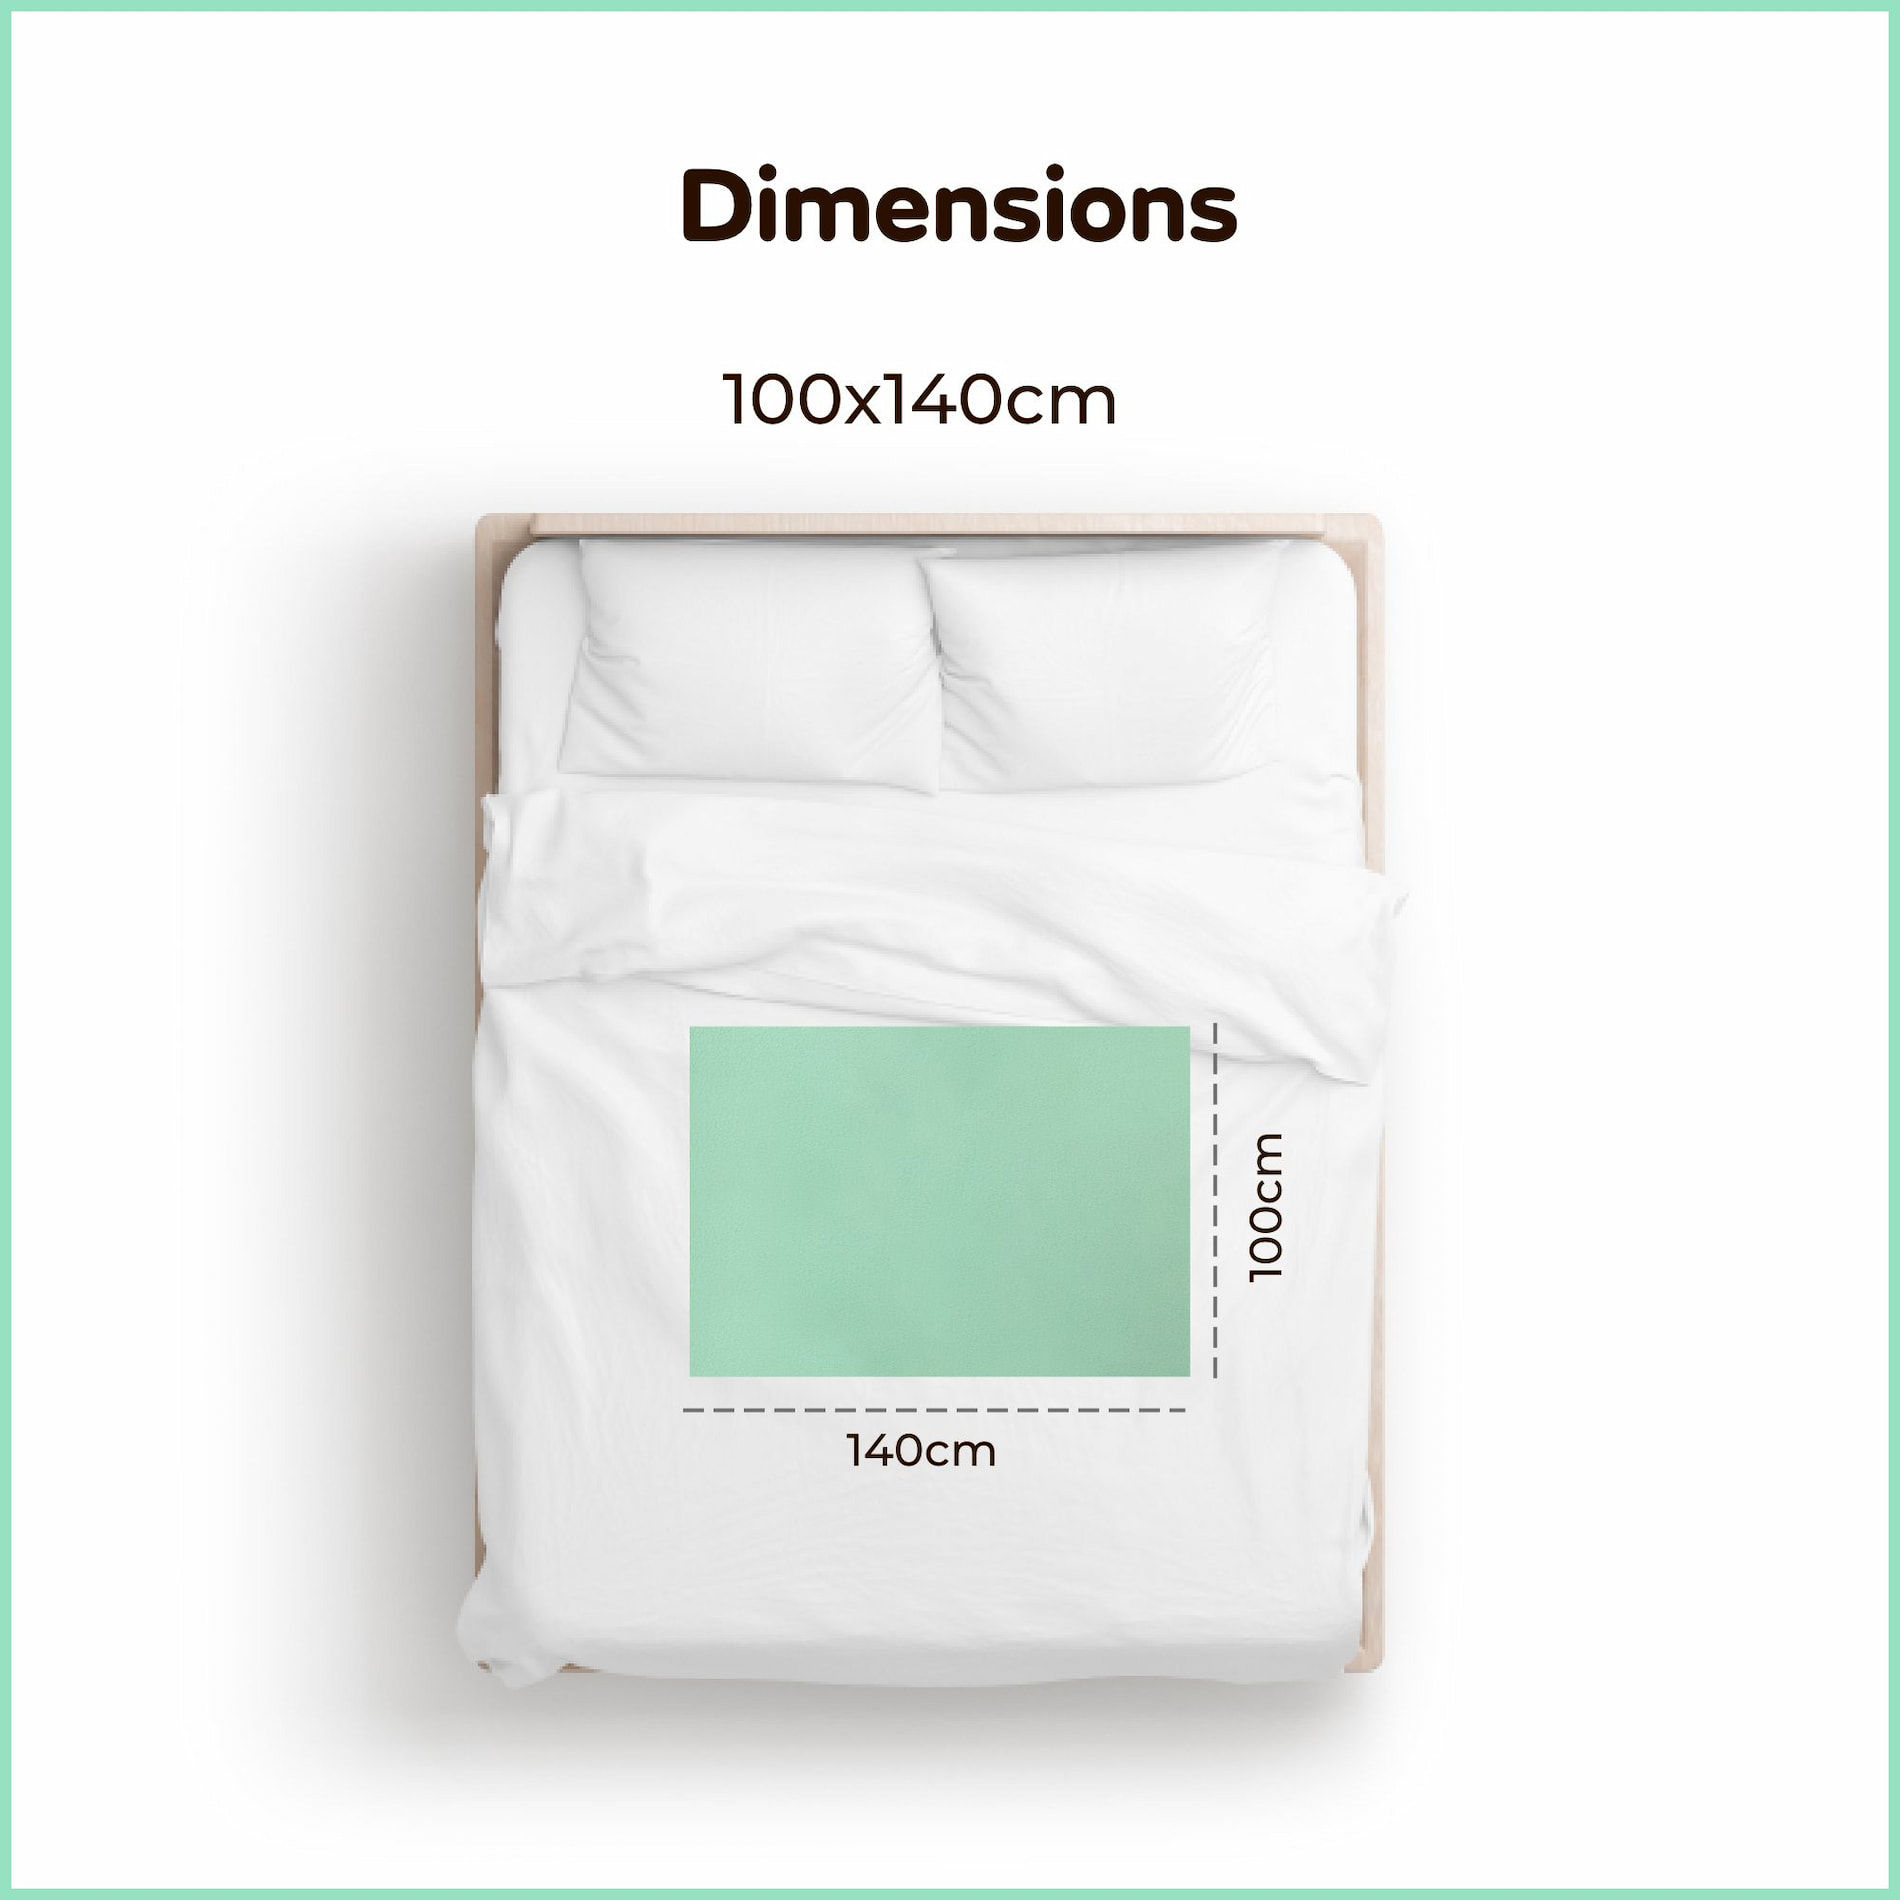 Mylo Waterproof Extra Absorbent Dry Sheet & Bed Protector - Sea Green (L)